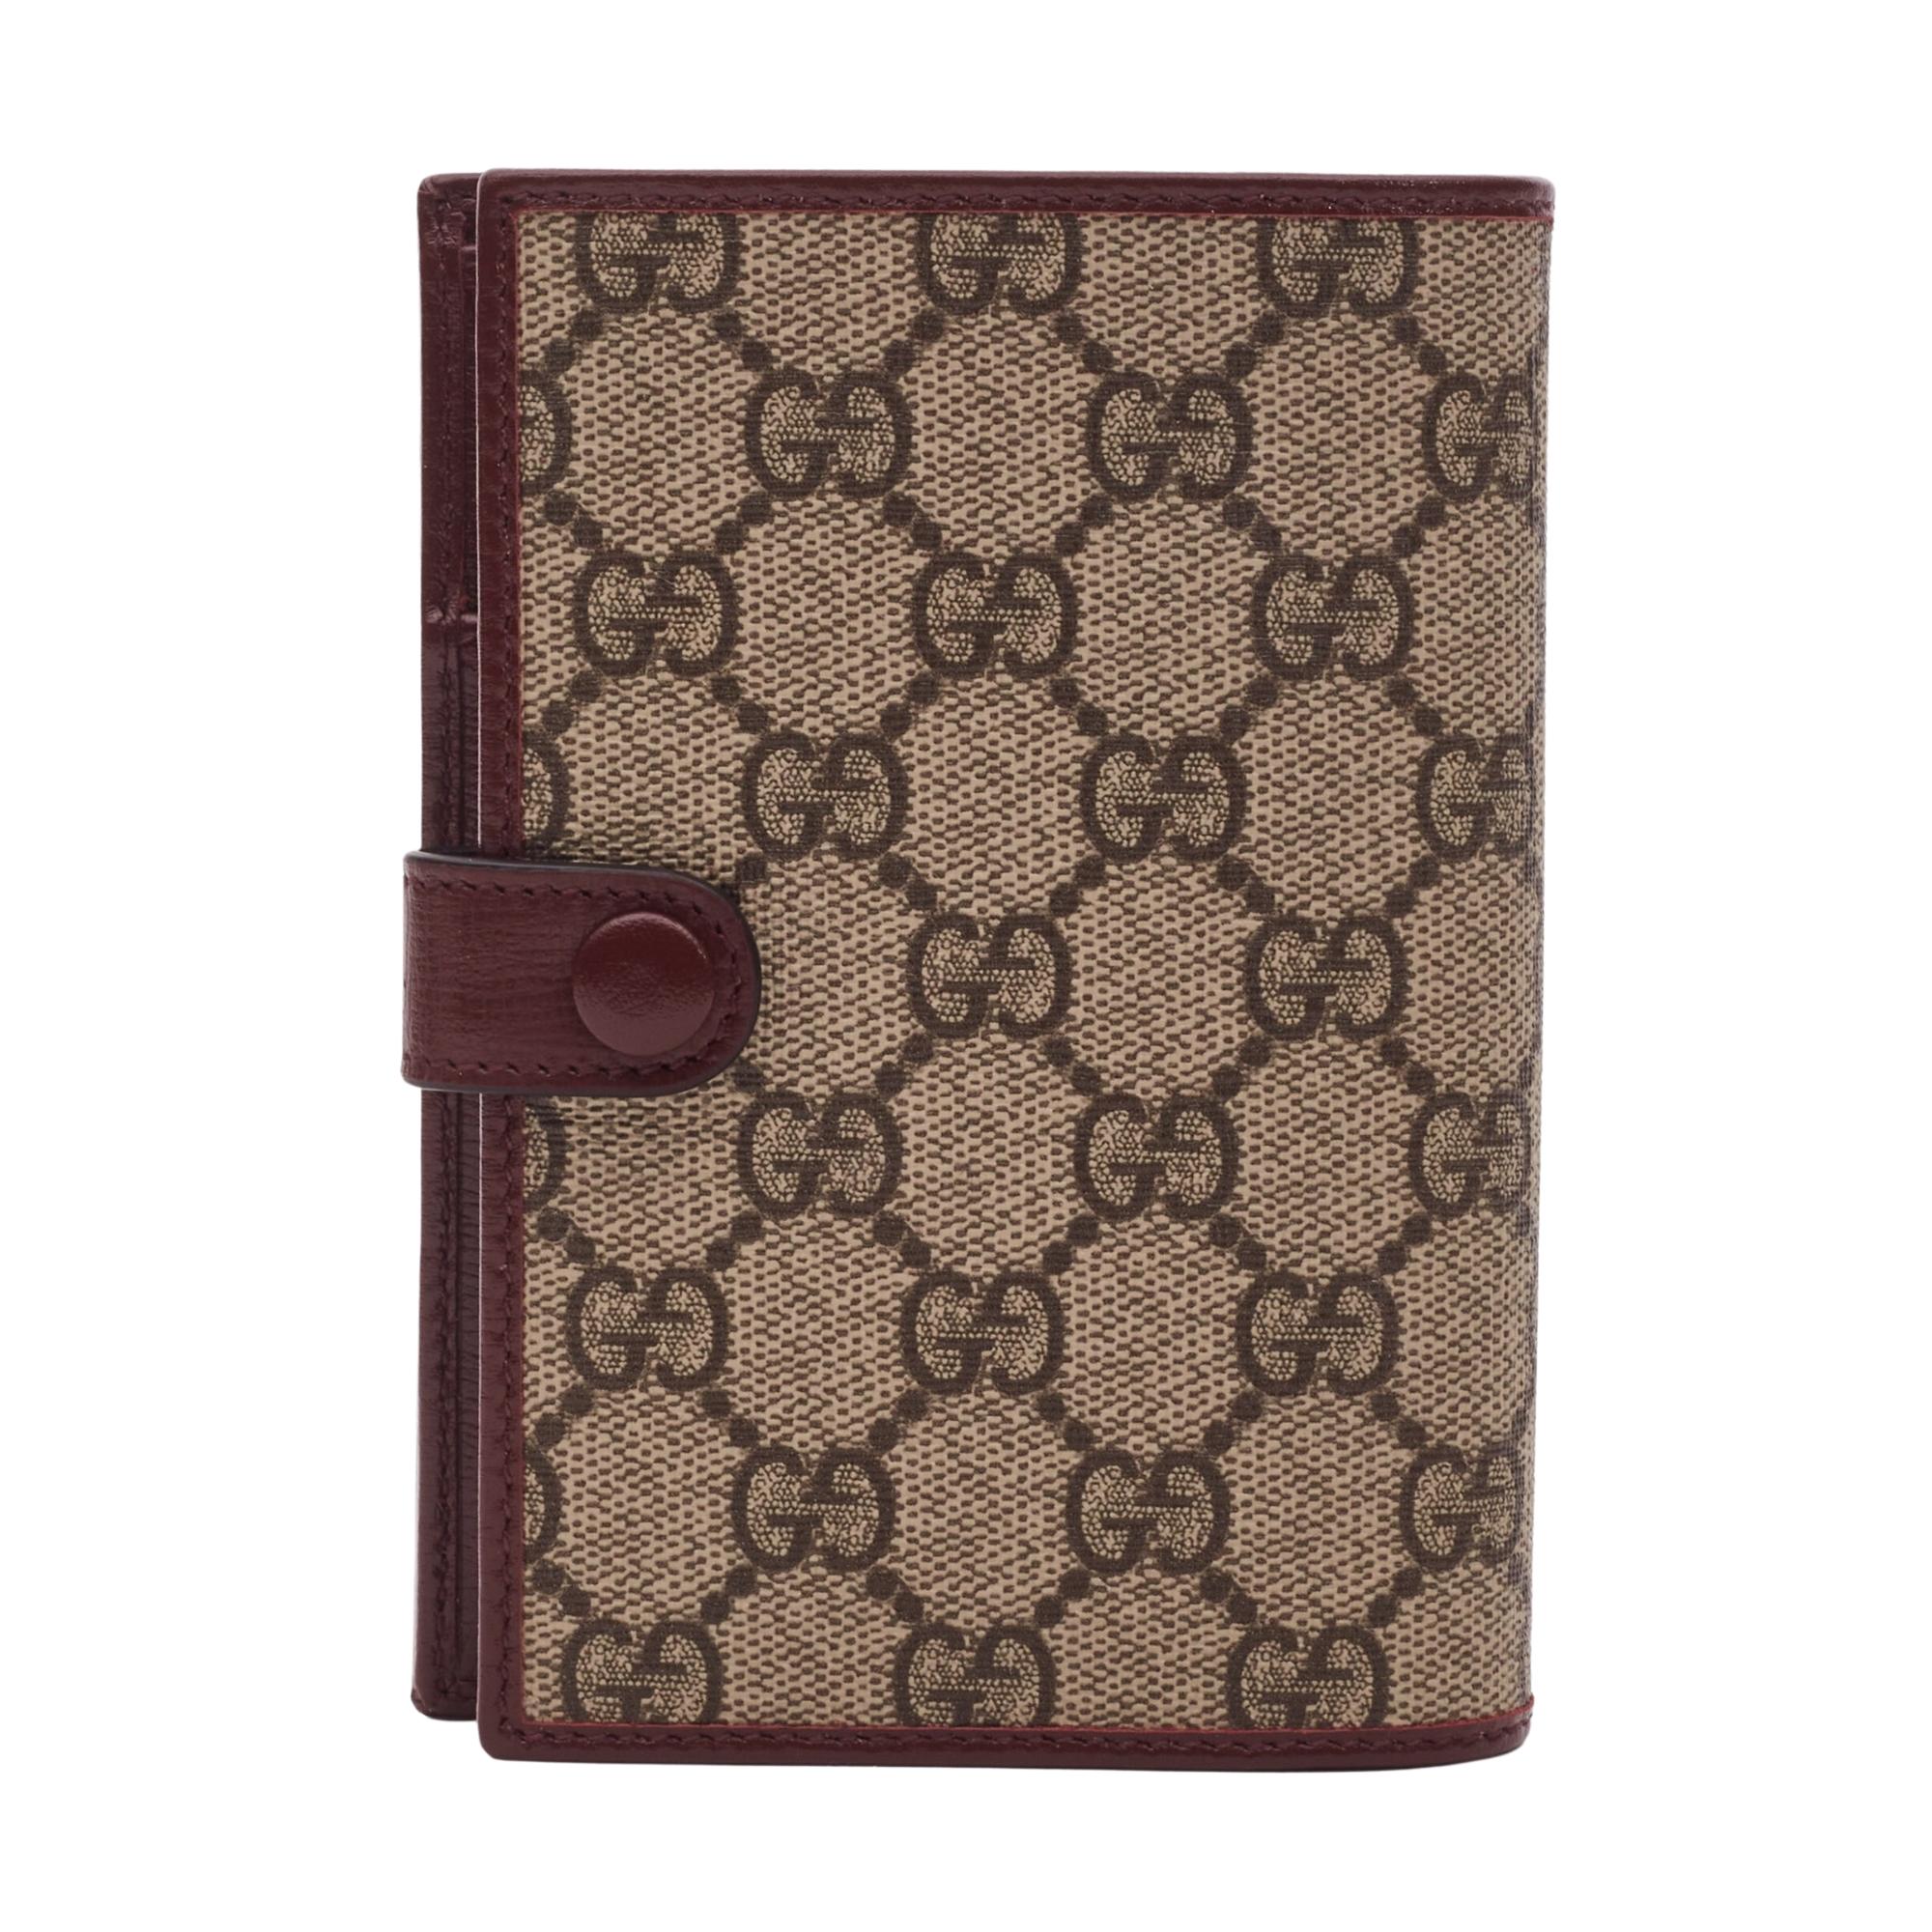 This classic looking Gucci passport case is made of signature beige and ebony GG Supreme canvas with leather detailing. The case features brown leather trim, snap-button closure, and an interior with a passport pocket, 3 open pockets, and 3 card